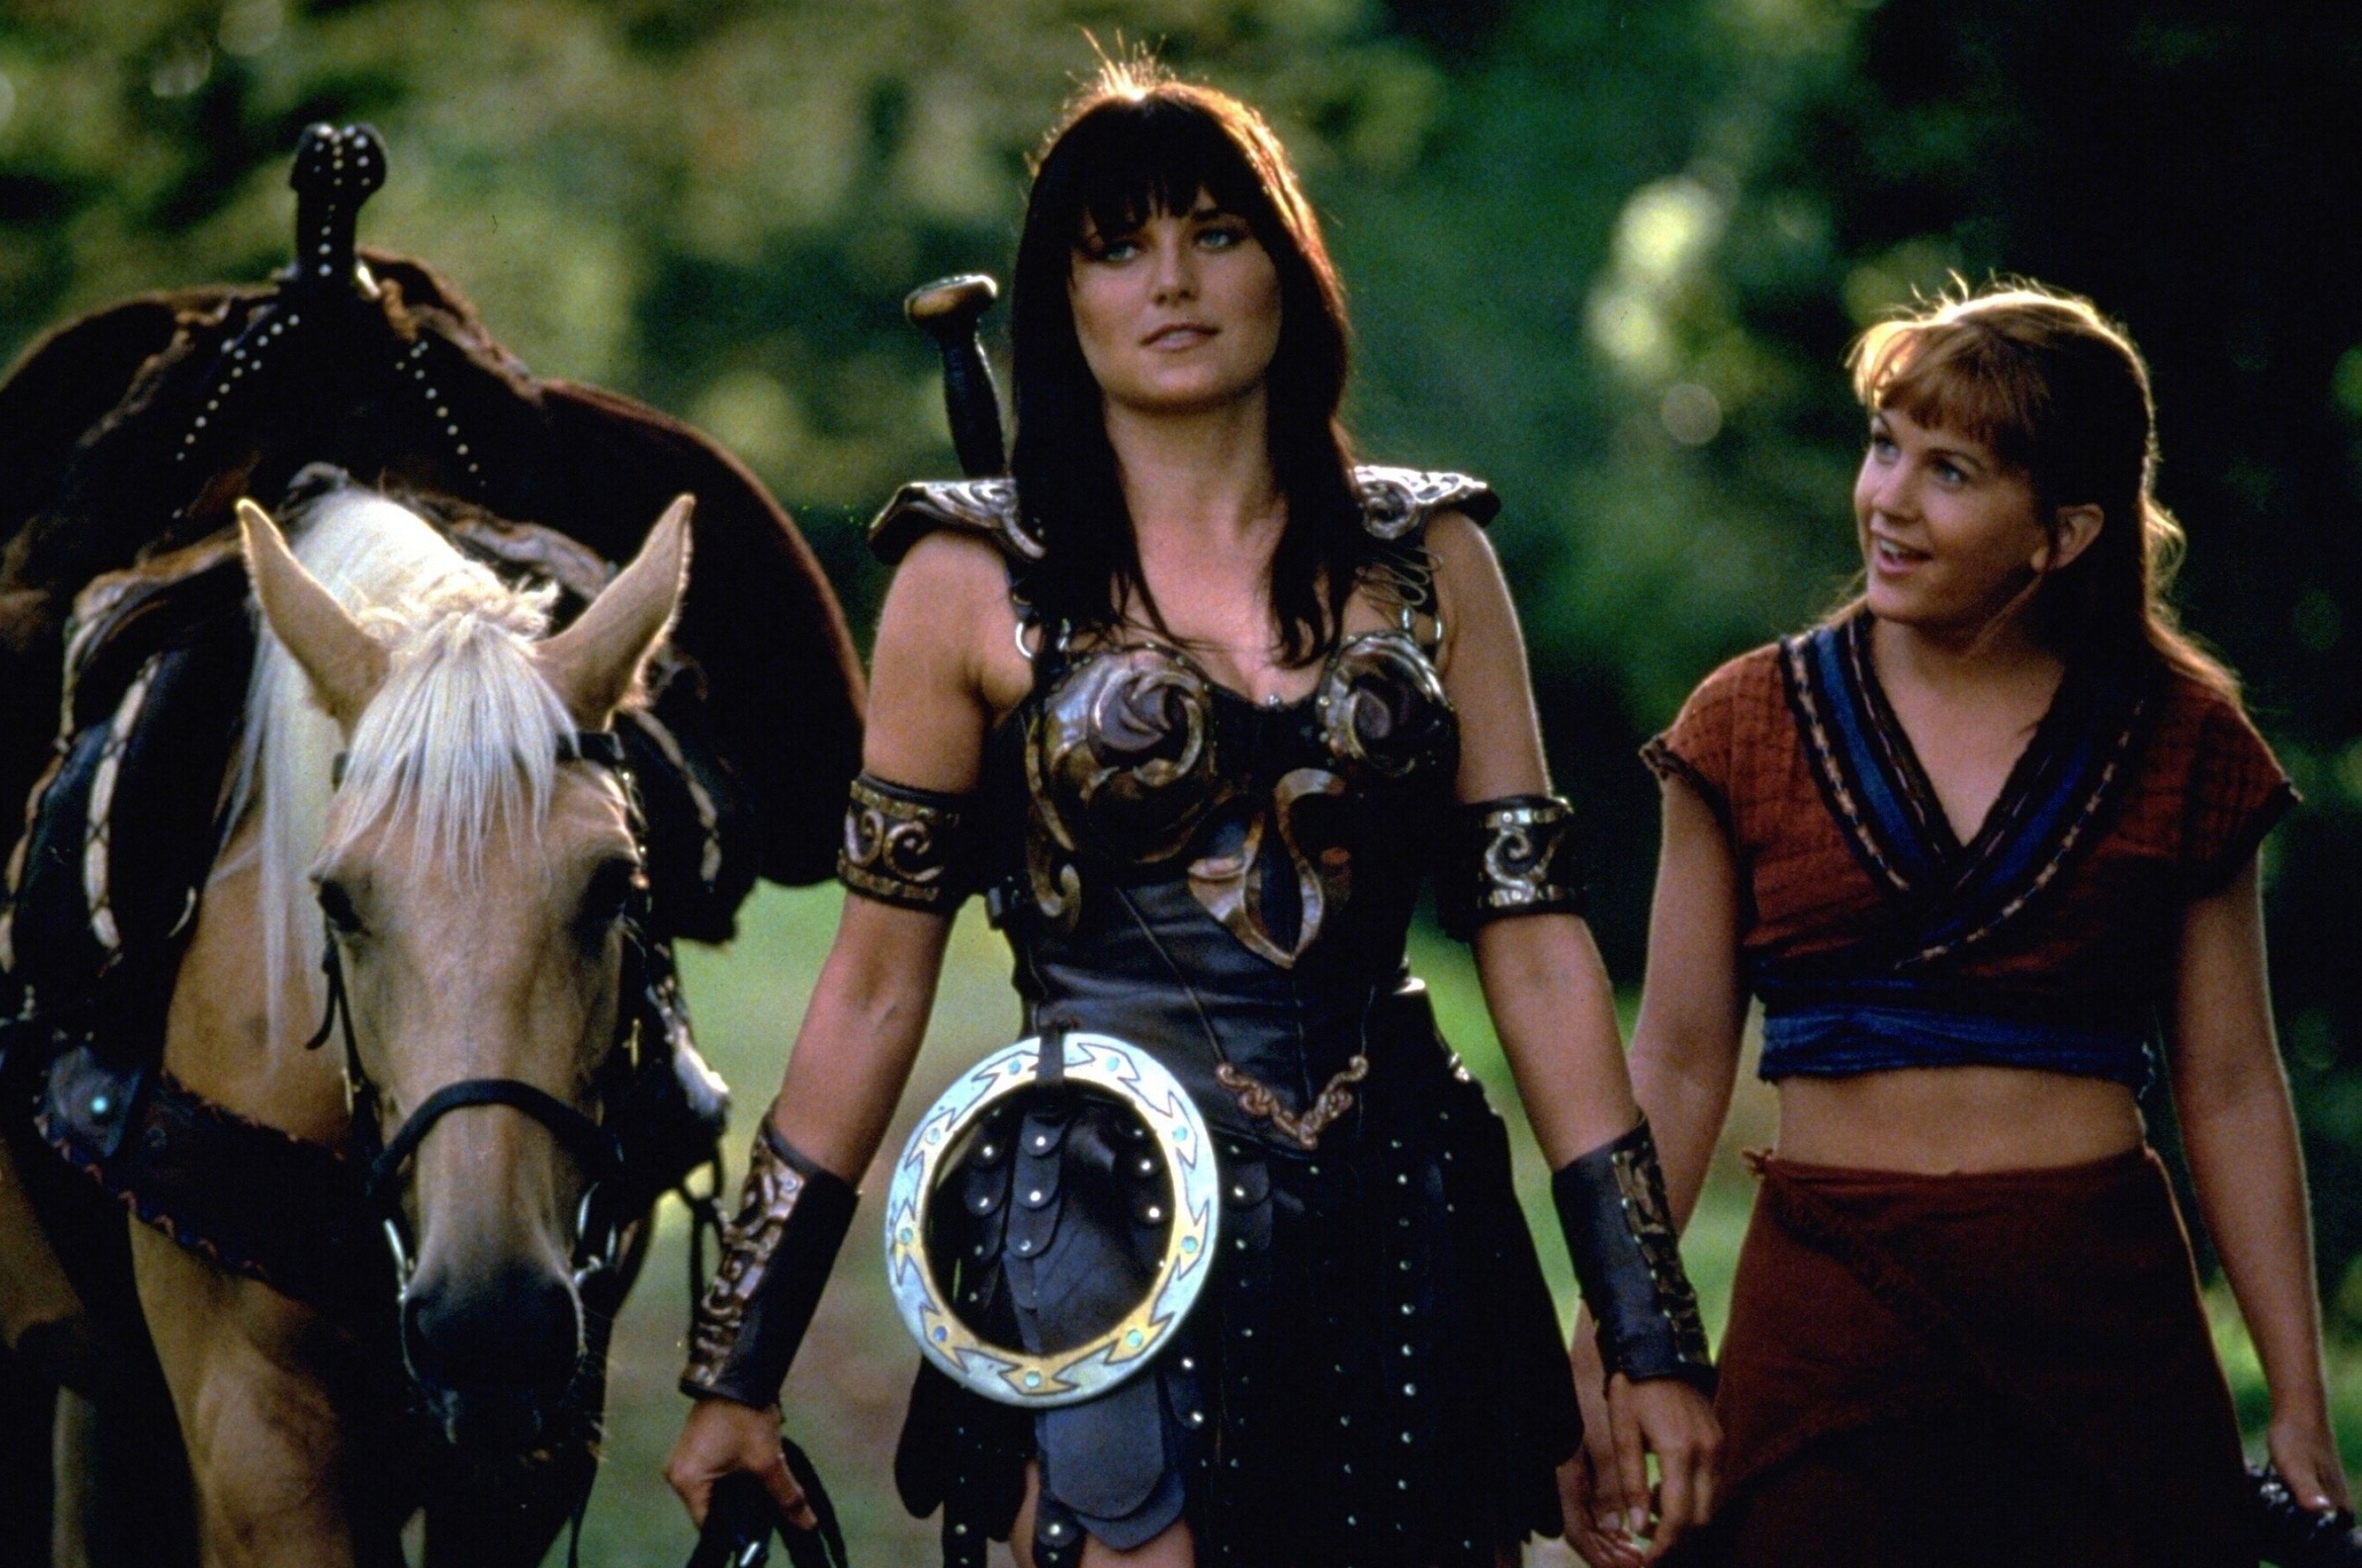 Xena: Warrior Princess (TV Series): Lucy Lawless, Renee O'Connor as Gabrielle, Produced by Raimi Productions. 3000x2000 HD Background.